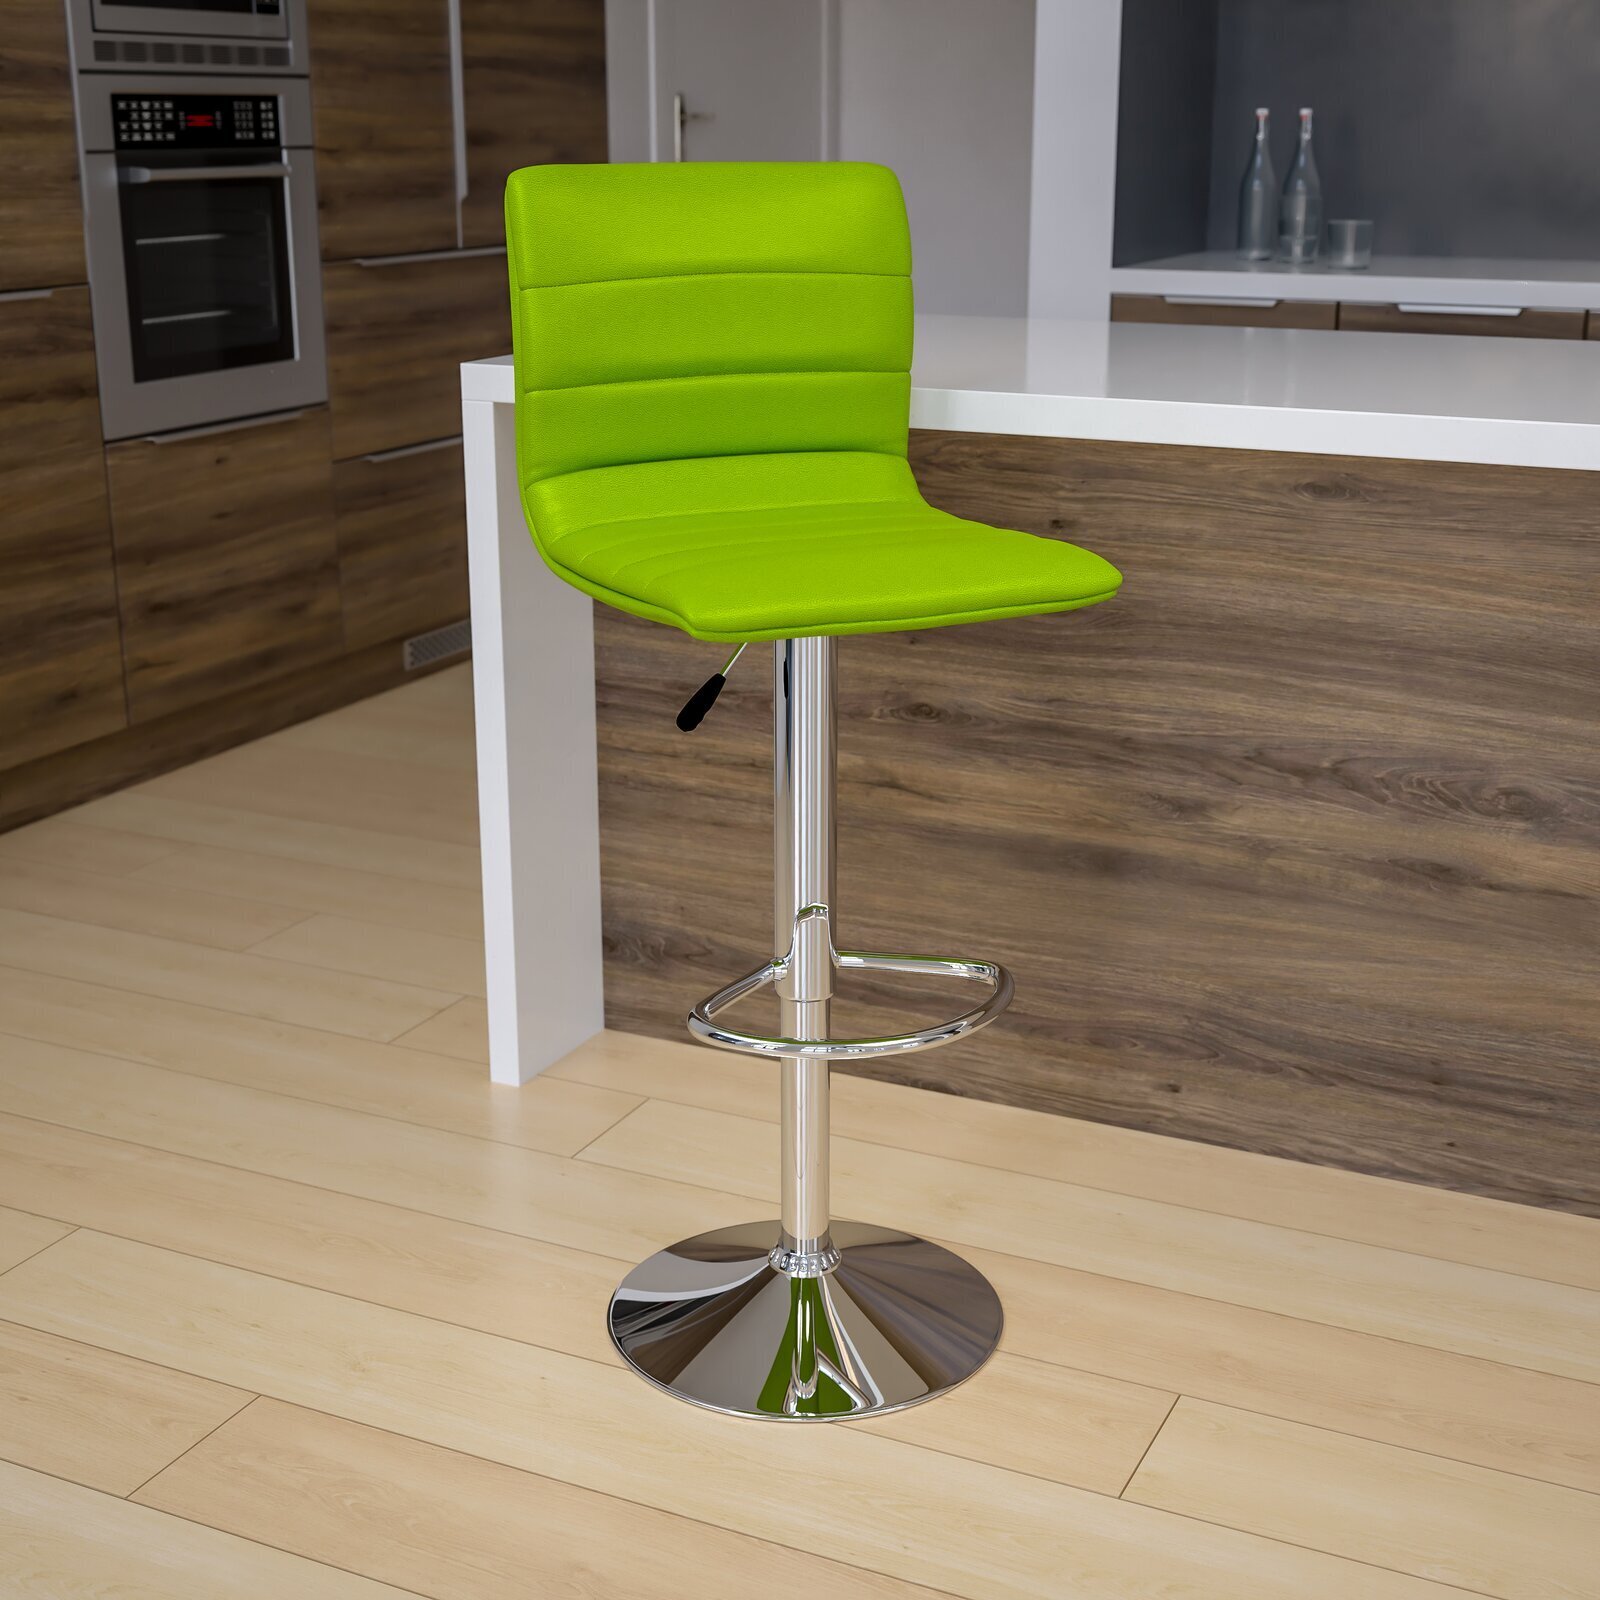 Adjustable extra tall bar stool in an accent hue